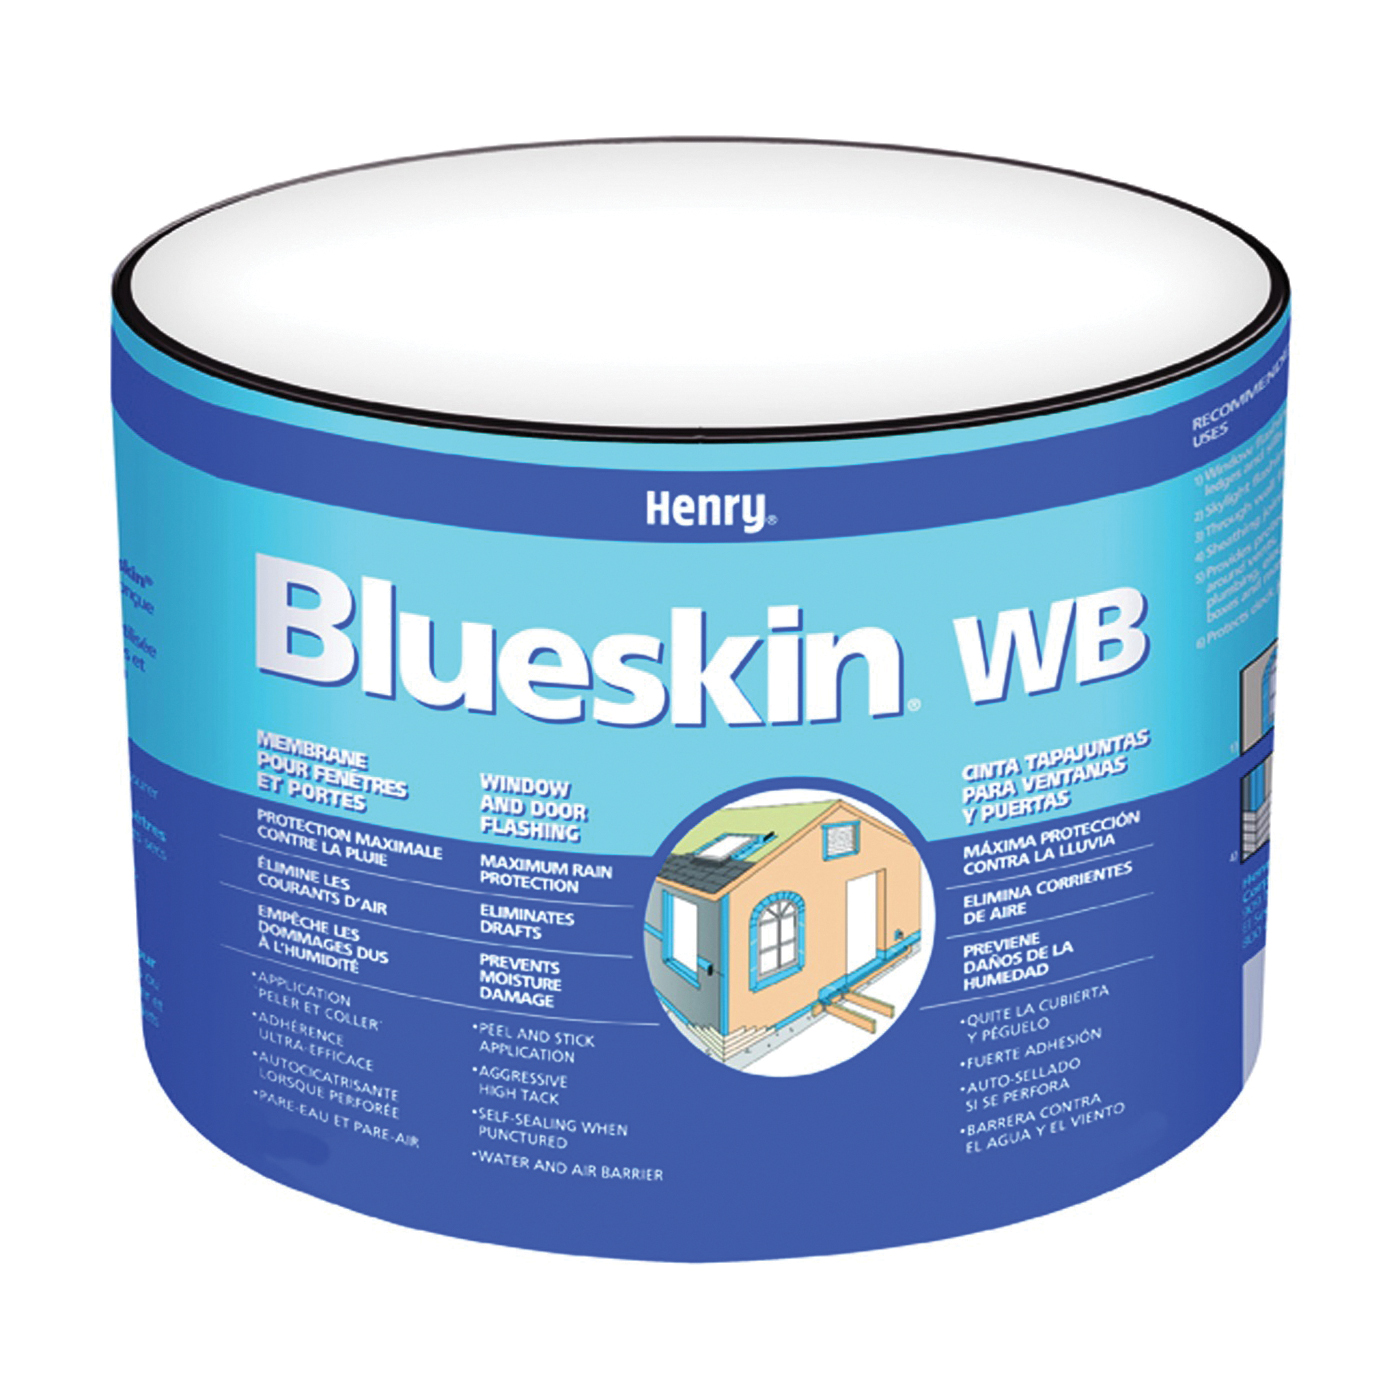 WB25 HE201WB929 Window and Door Flashing, 75 ft L, 4 in W, Paper, Blue, Self-Adhesive